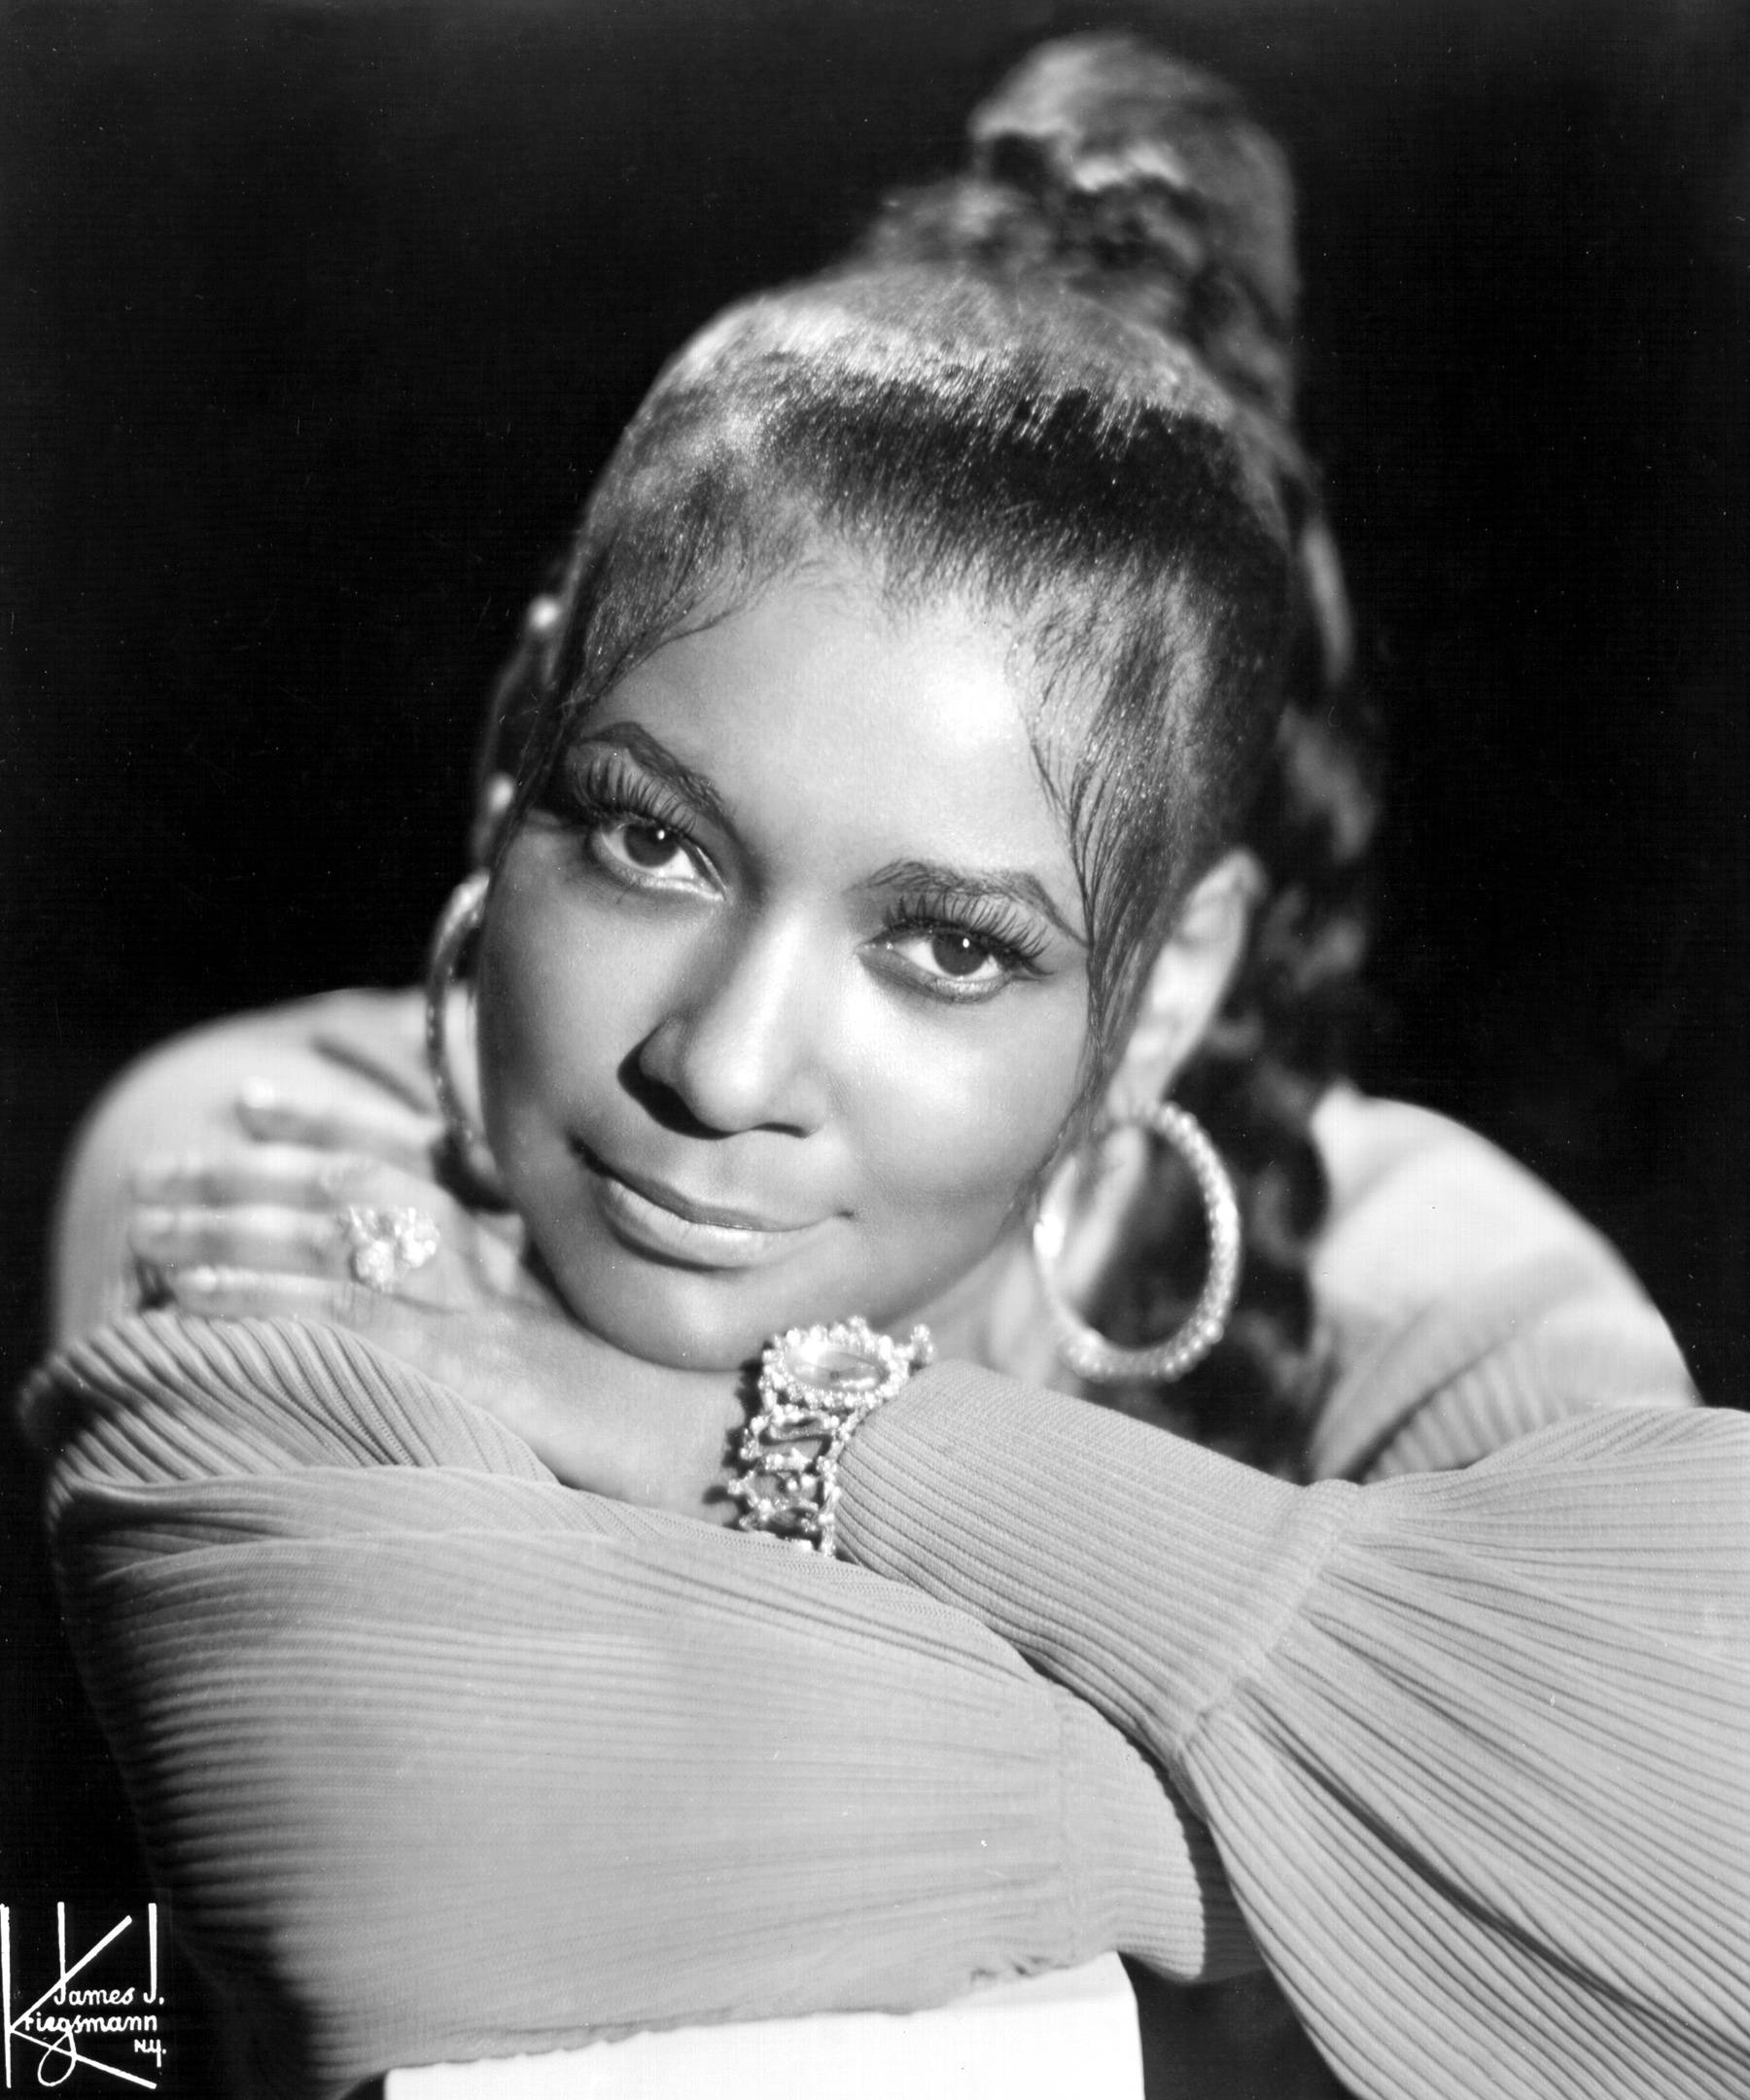 Sylvia Robinson - Sylvia Robinson, 75, a singer, record producer and songwriter famed for forming the pioneering hip hop group Sugarhill Gang, died on September 29.(Photo: Michael Ochs Archives/Getty Images)